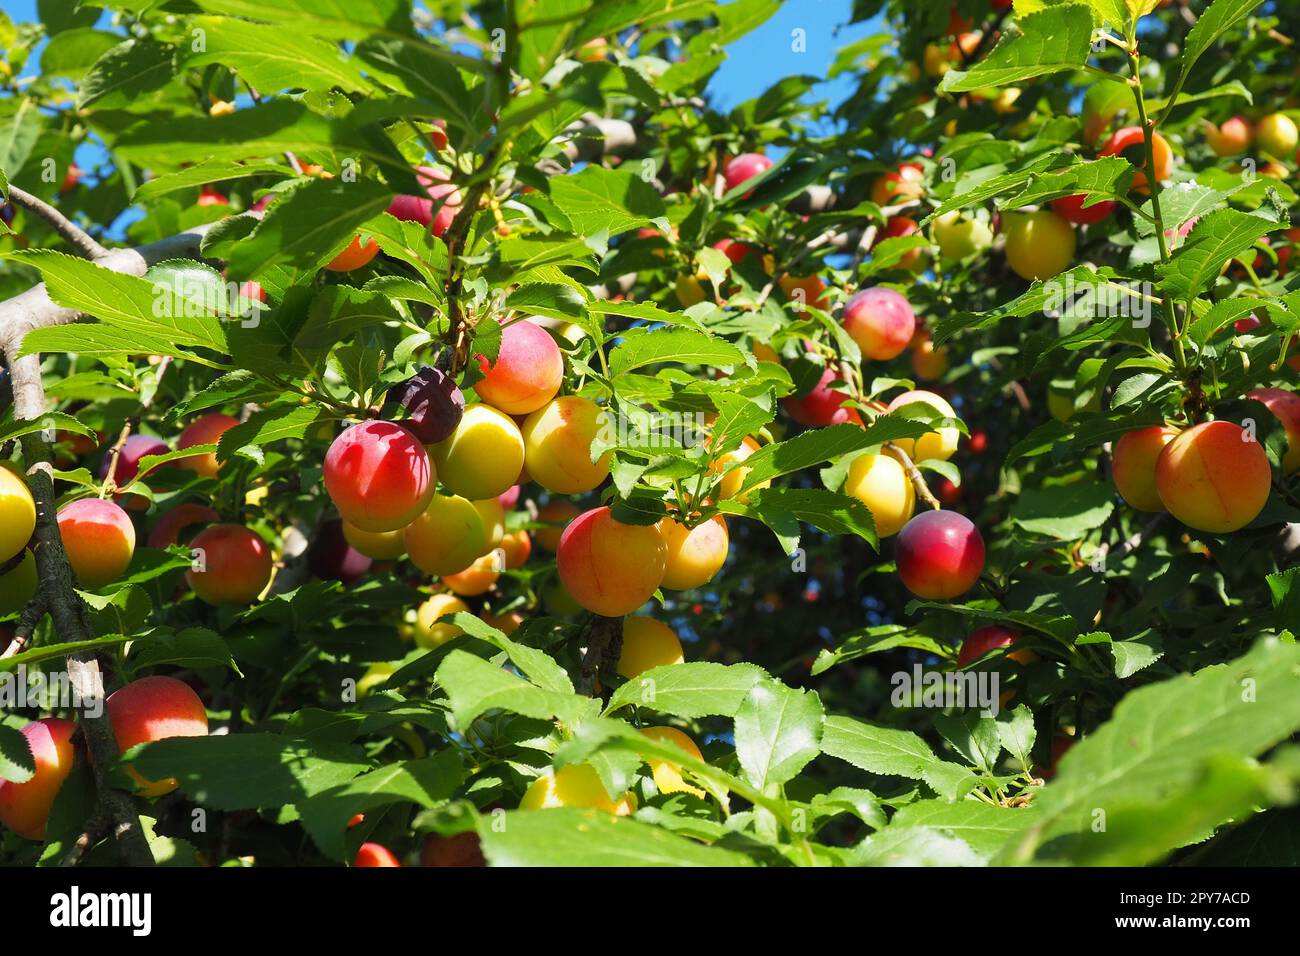 Prunus cerasifera is a species of plum known by the common names cherry plum and myrobalan plum. ornamental tree for garden and landscaping. Yellow and red plum fruits on the branches Stock Photo